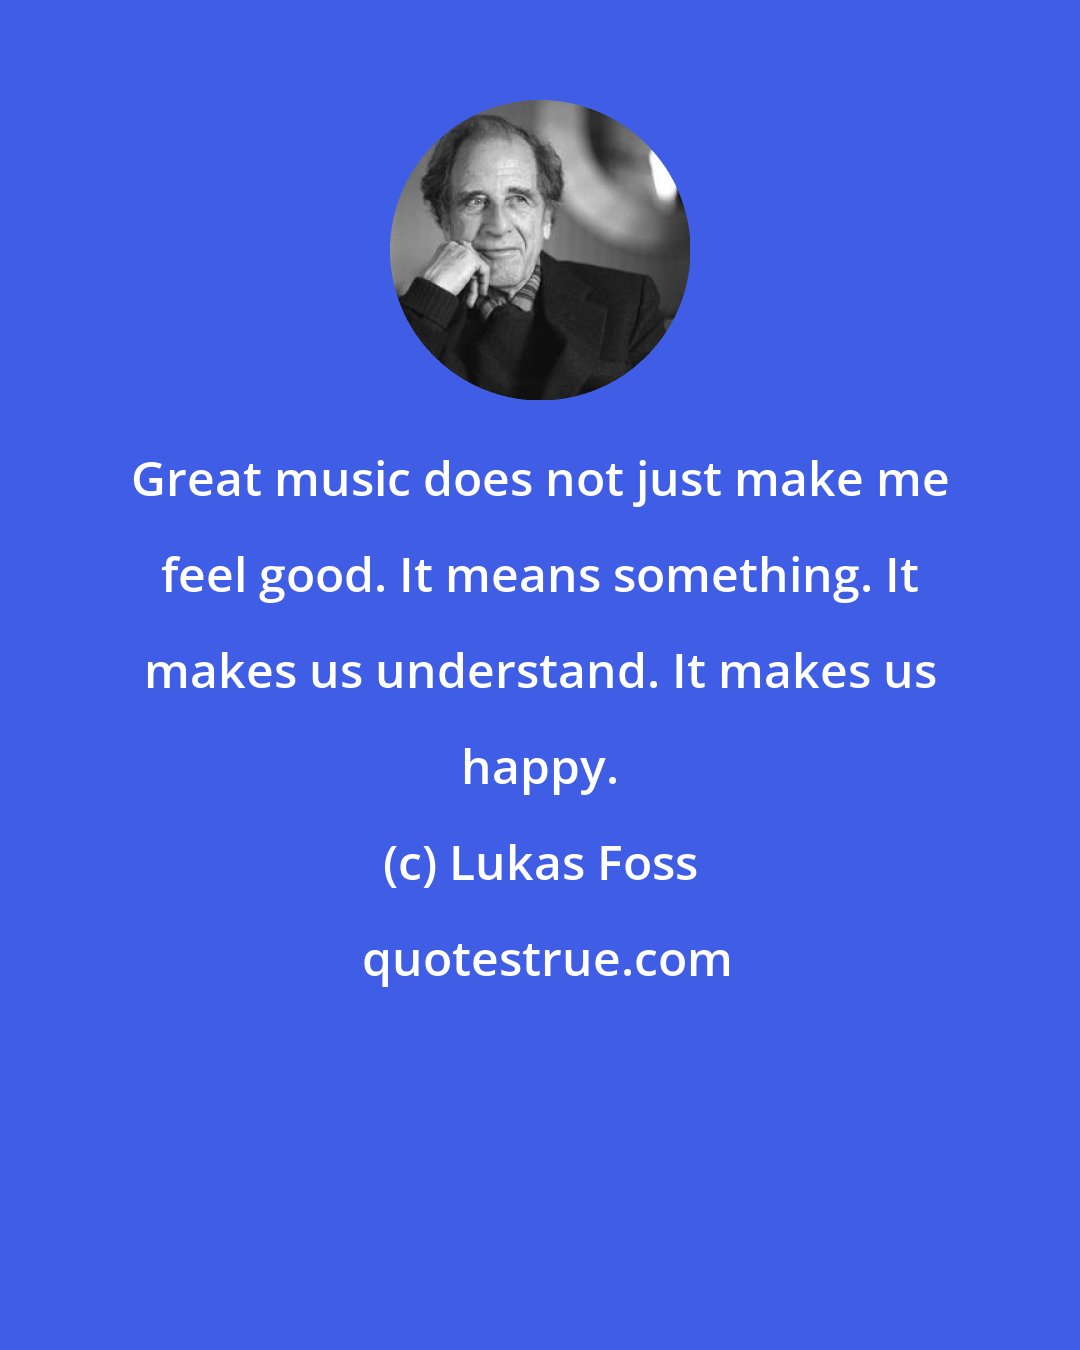 Lukas Foss: Great music does not just make me feel good. It means something. It makes us understand. It makes us happy.